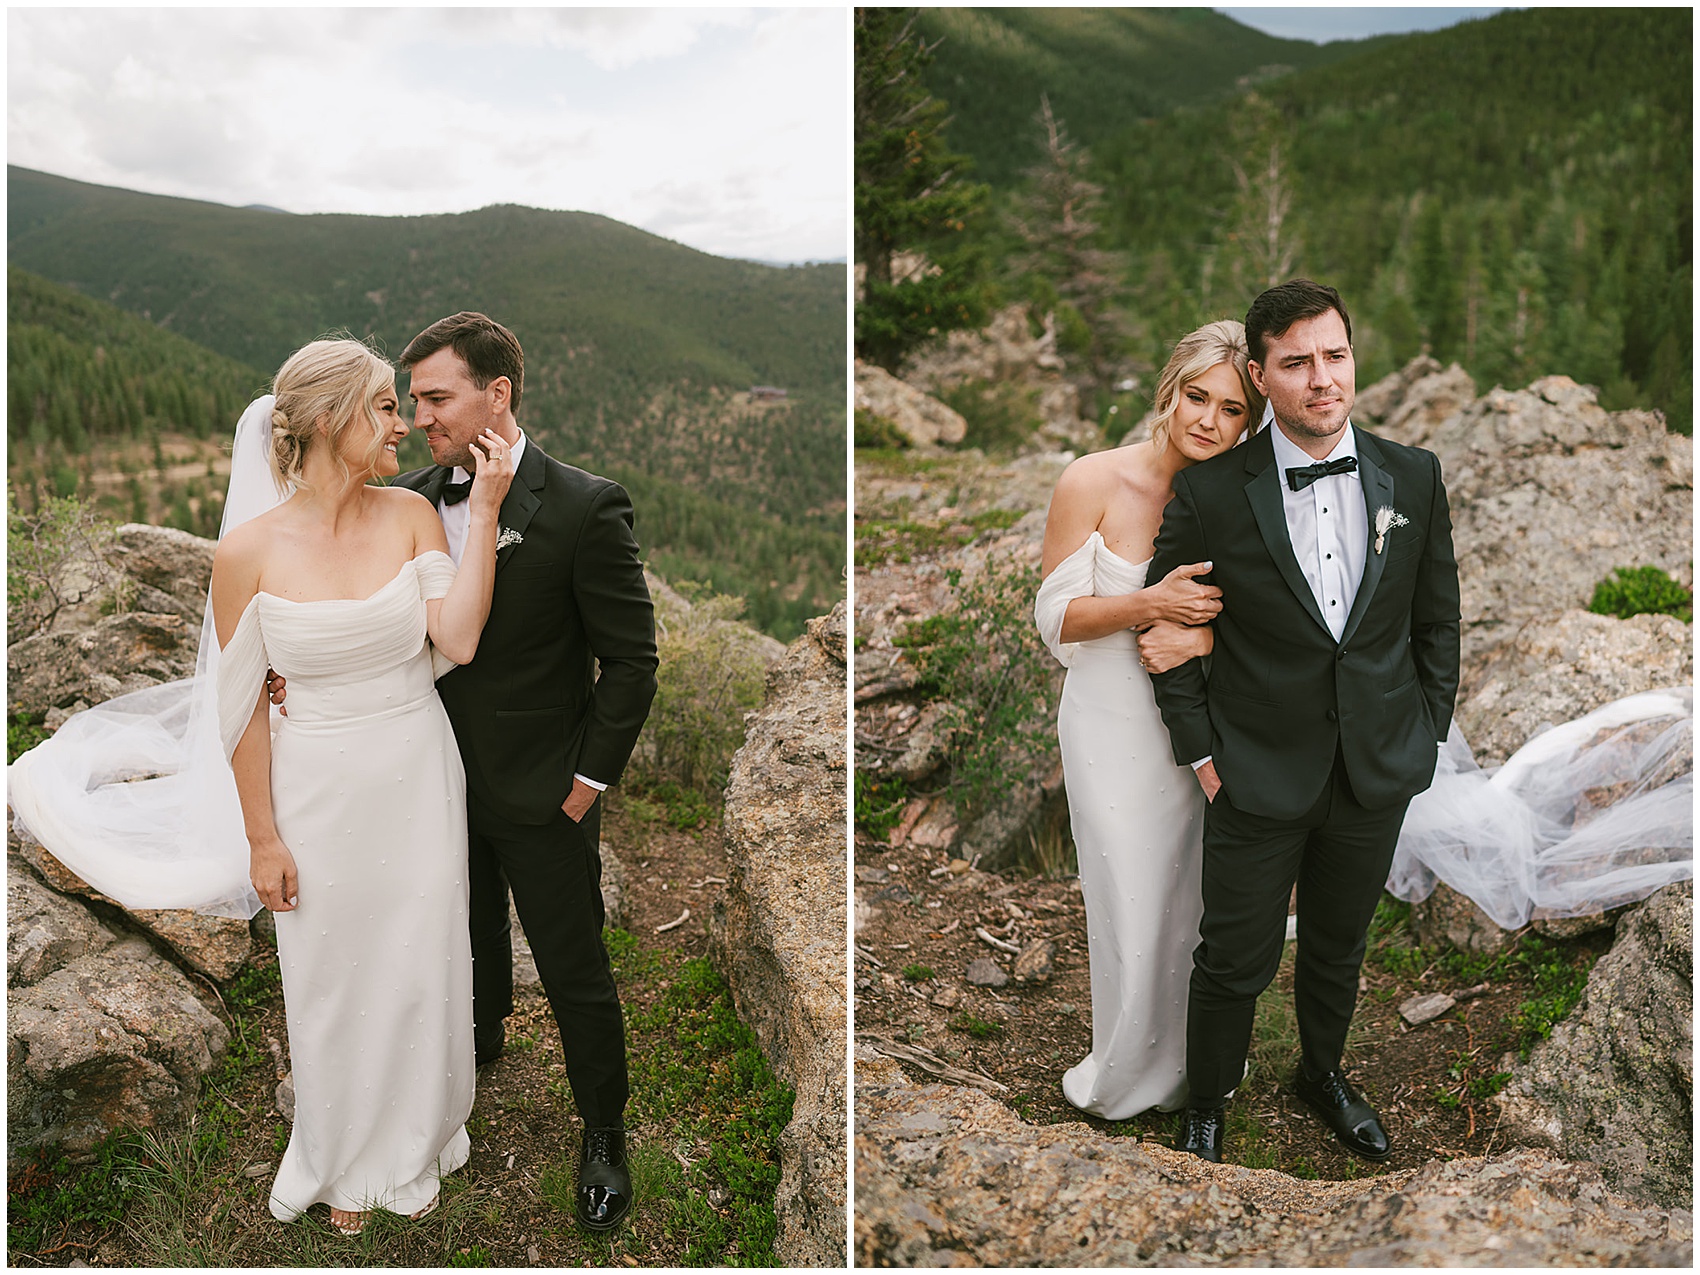 Newlyweds stand together on a rocky mountain trail at sunset north star gatherings wedding